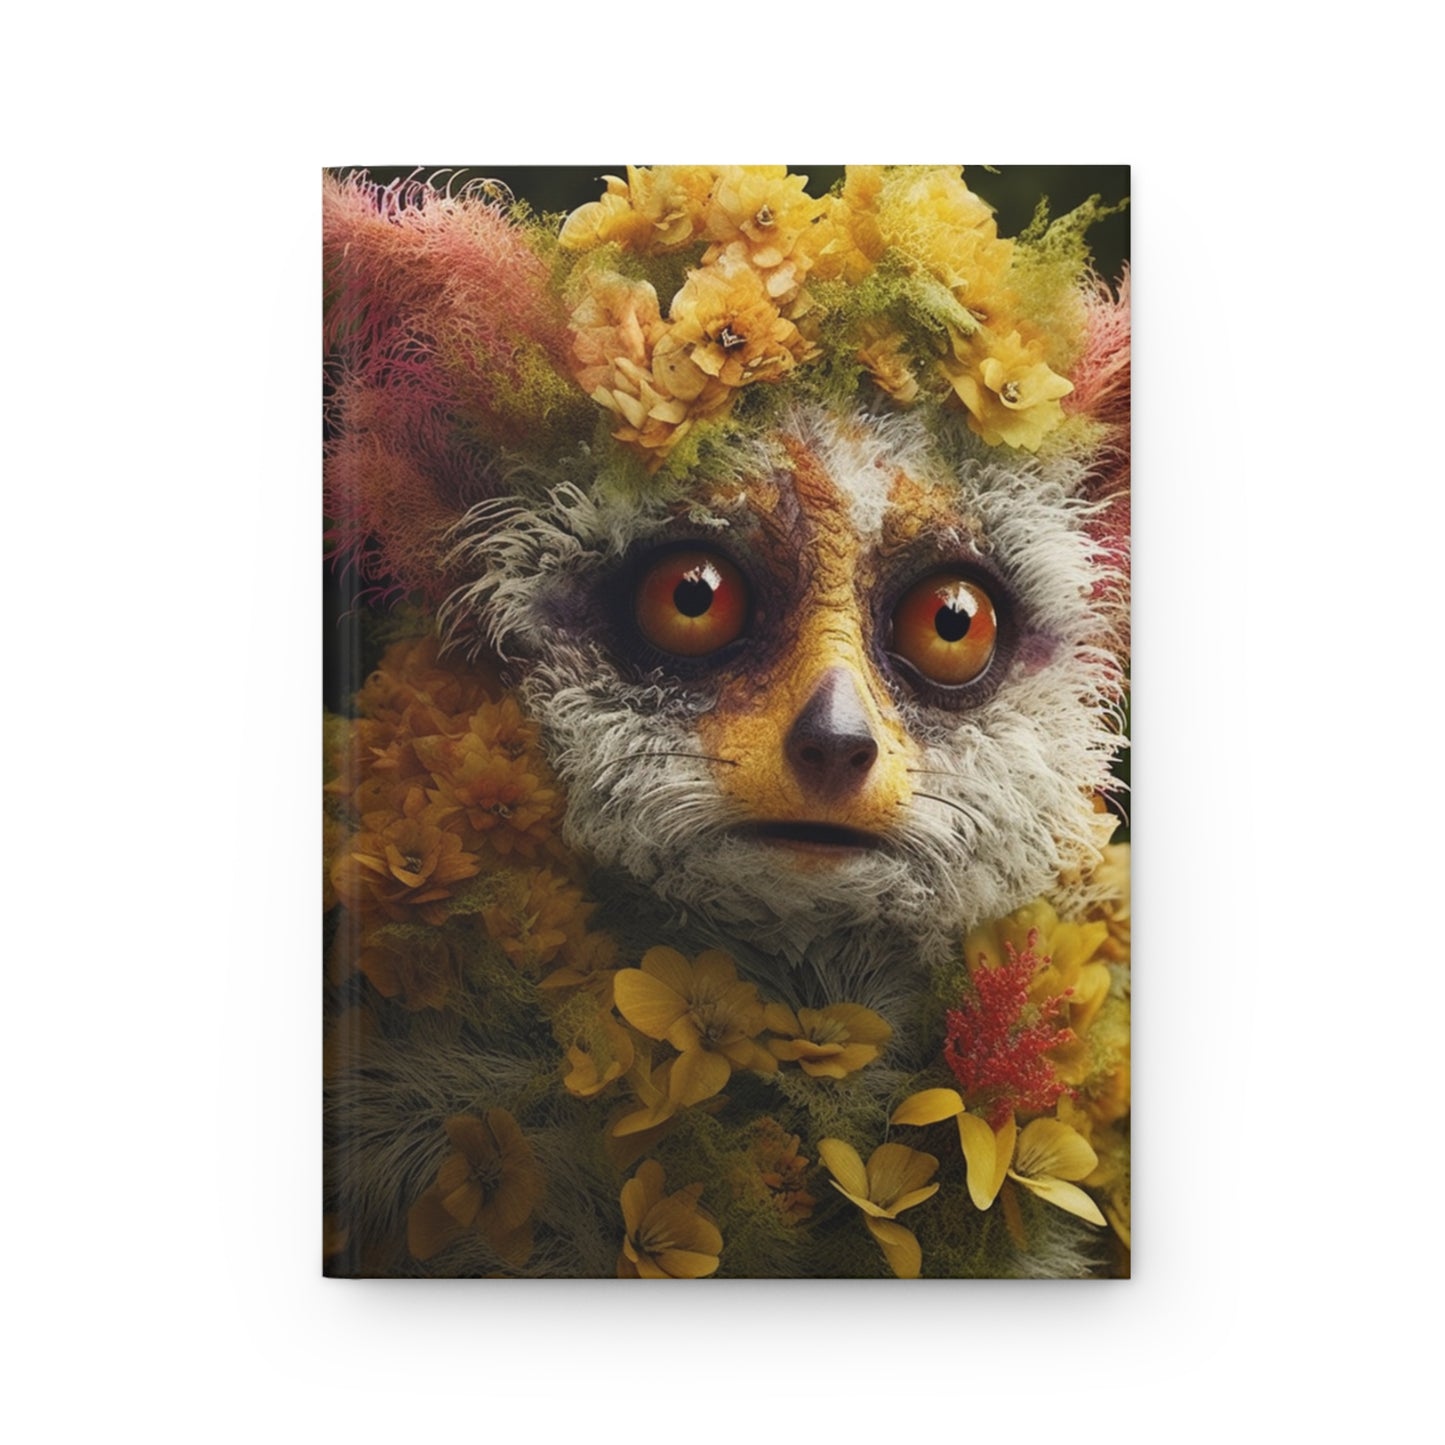 Floral Lemur Hardcover Notebook, Journal for Self Care, Gratitude, Wellness, and Affirmations, Lined Gift for Men and Women, 5.75"x7.5"